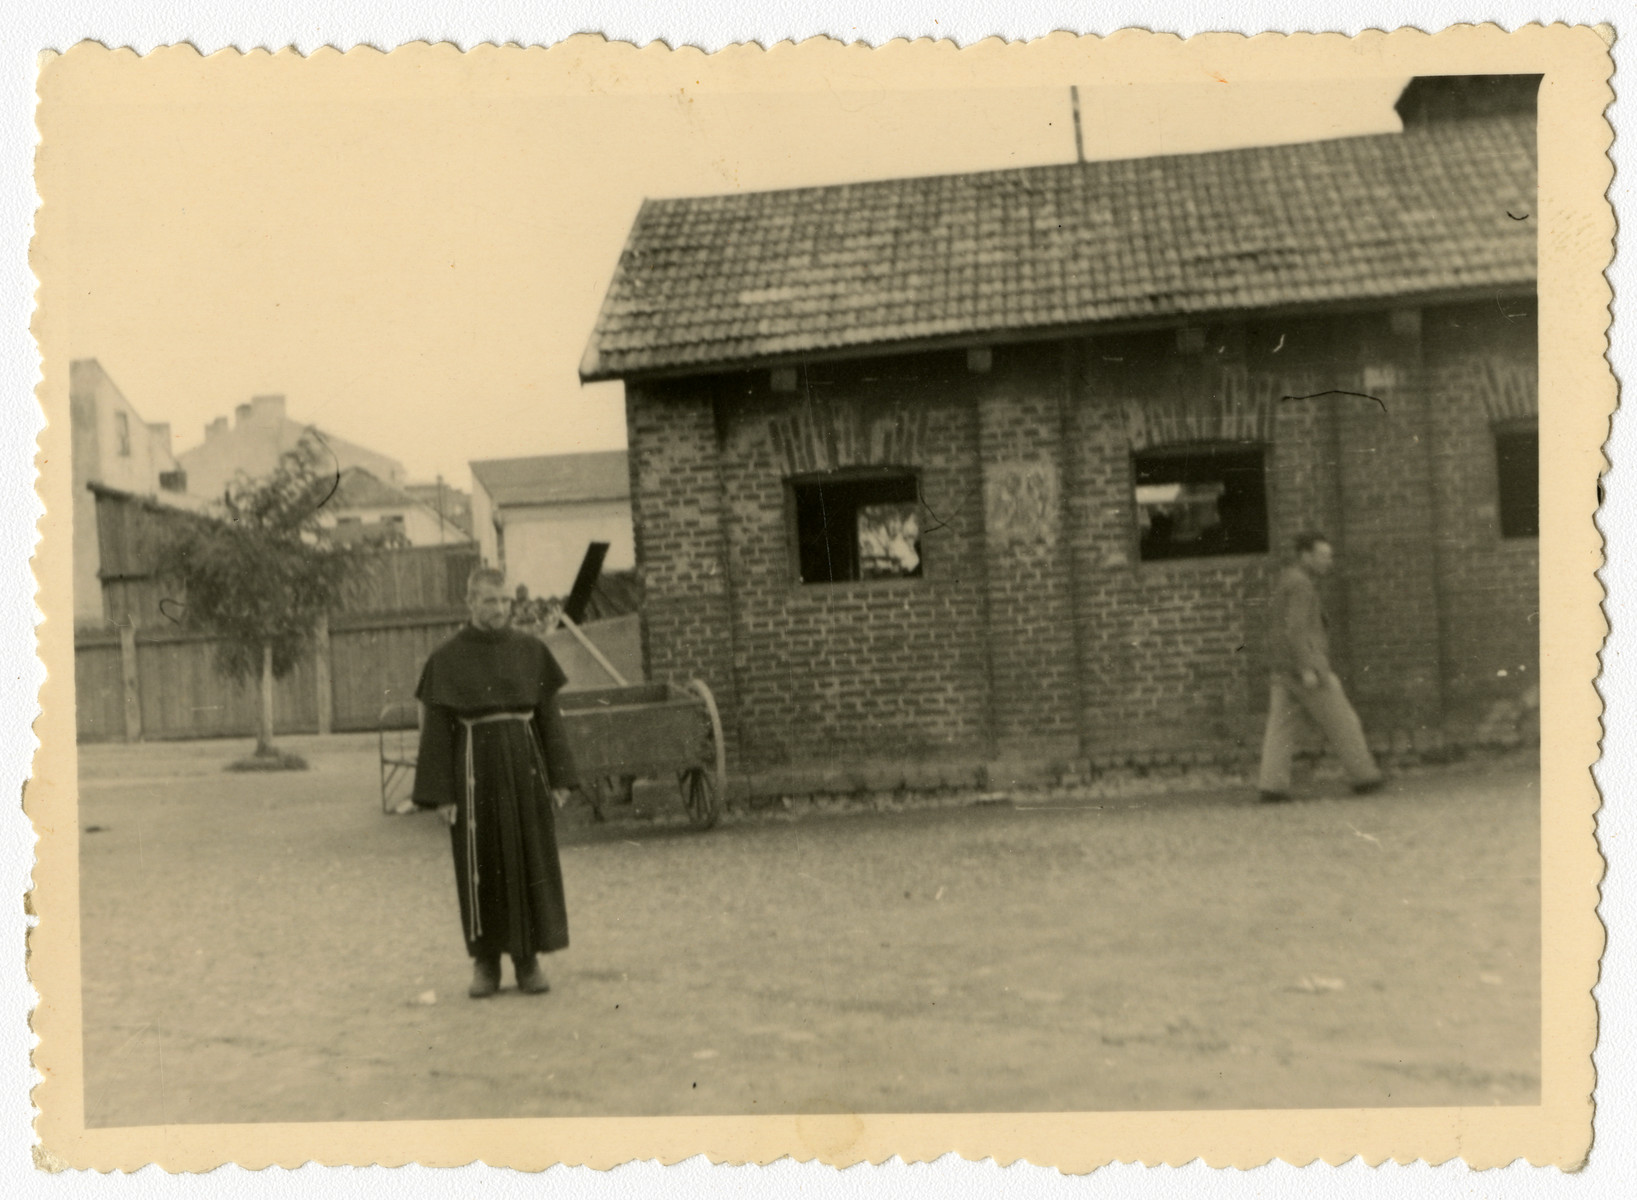 A Polish cleric stands in an open square.

This image is contained in an album found by Jacob Igra in an apartment in Sosnowiec after the war. Many of the photographs are believed to have been taken by a soldier with the SD-SIPO (Sicherheitspolizei) following the invasion of Poland in 1939. Additional photographs depict einsatzgruppen activities at sites throughout Nazi occupied Eastern Europe and may have been later additions to the album.